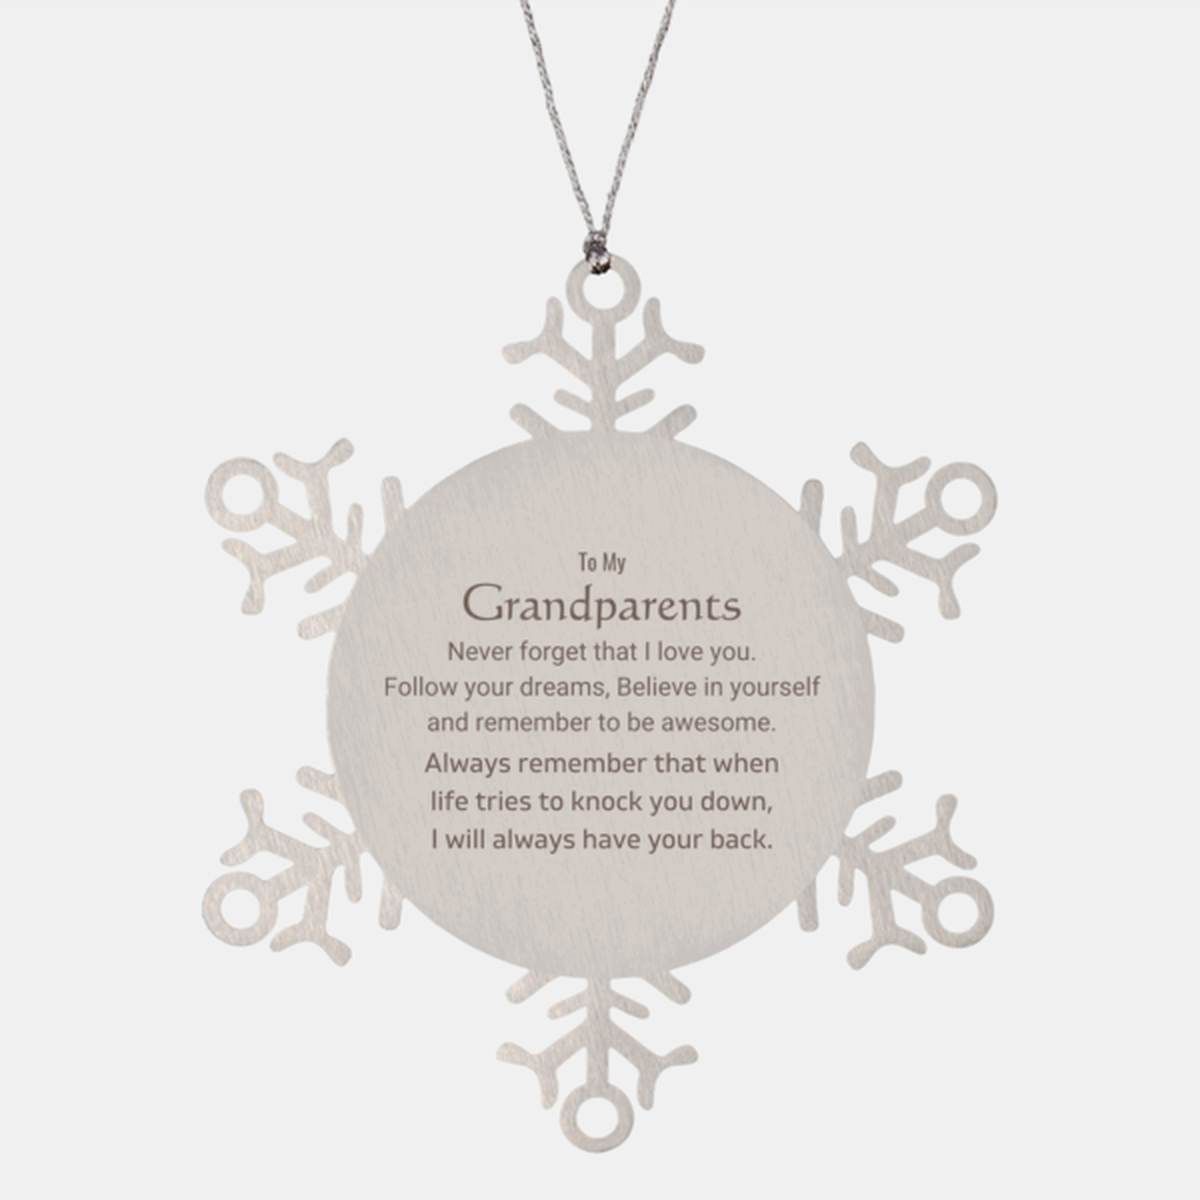 Inspirational Gifts for Grandparents, Follow your dreams, Believe in yourself, Grandparents Snowflake Ornament, Birthday Christmas Unique Gifts For Grandparents